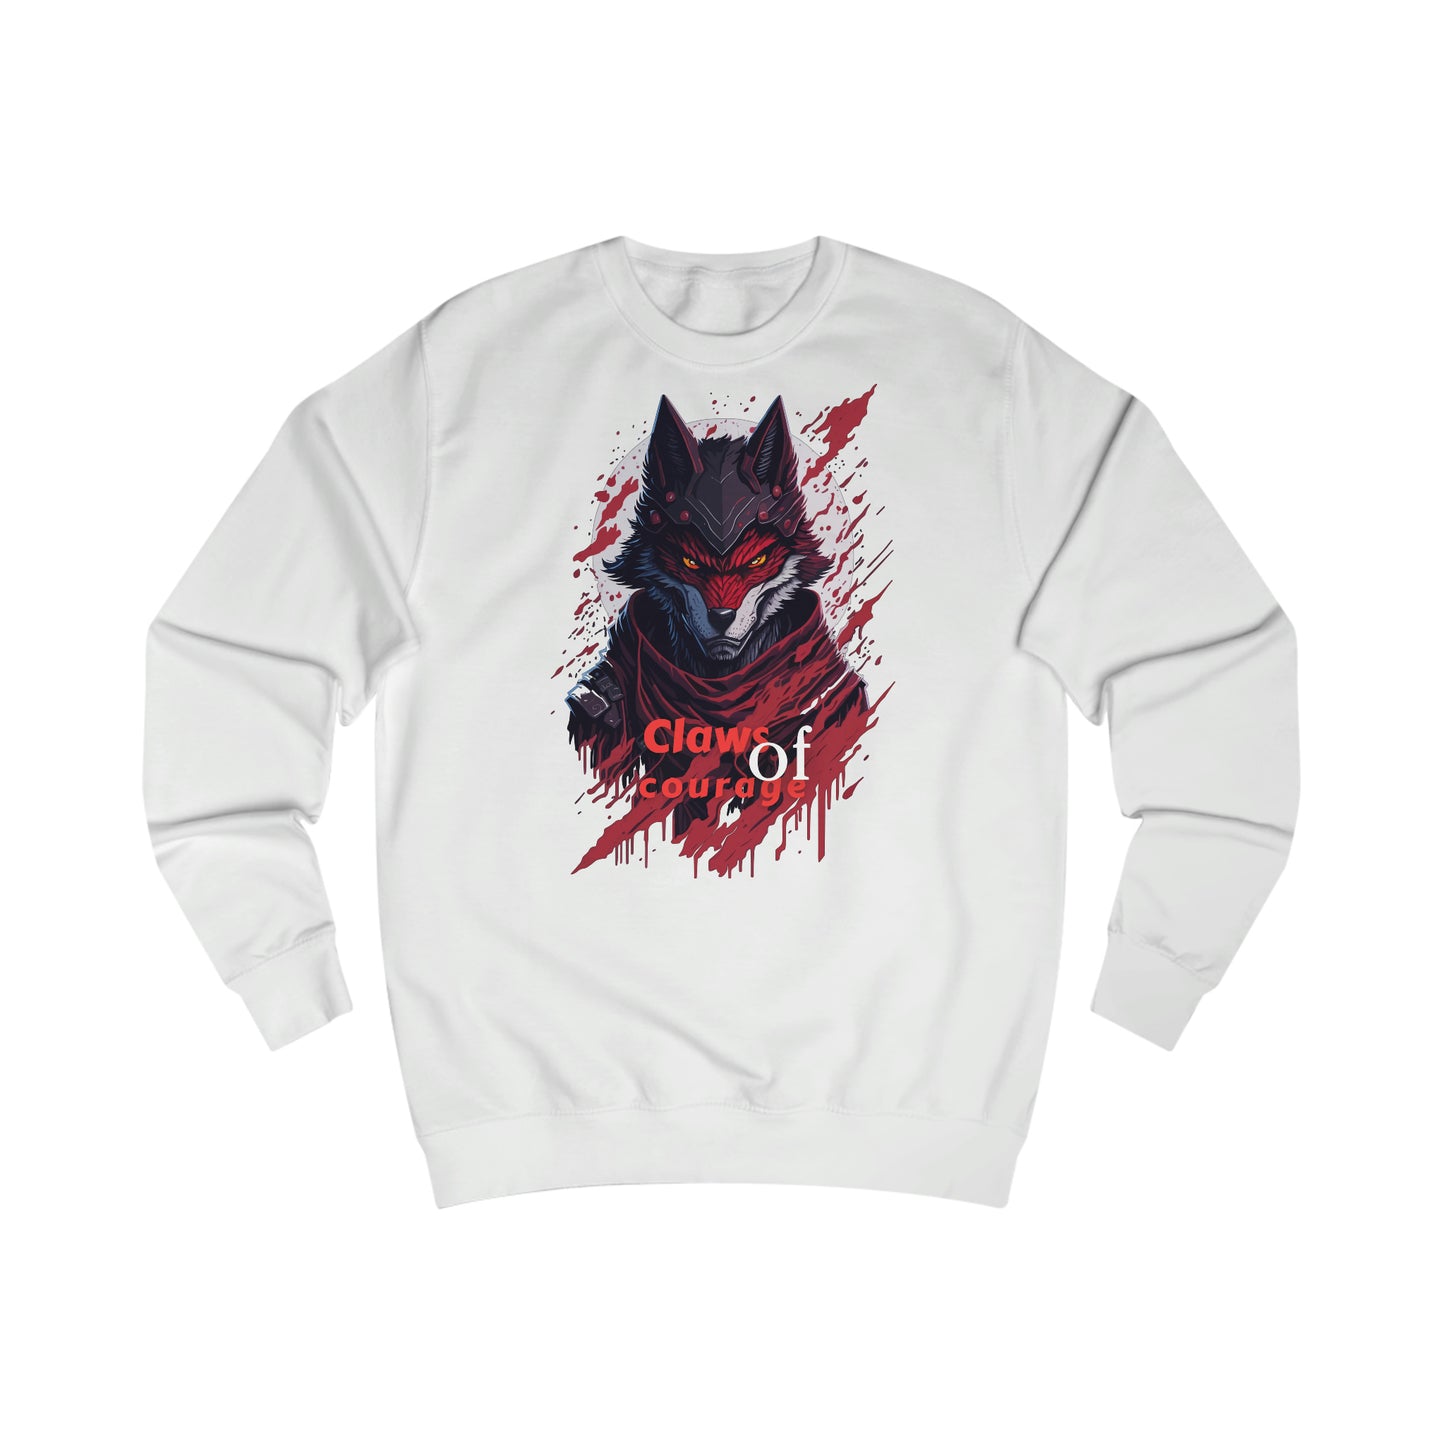 Howl with the Claws of Courage  --  Men's Sweatshirt